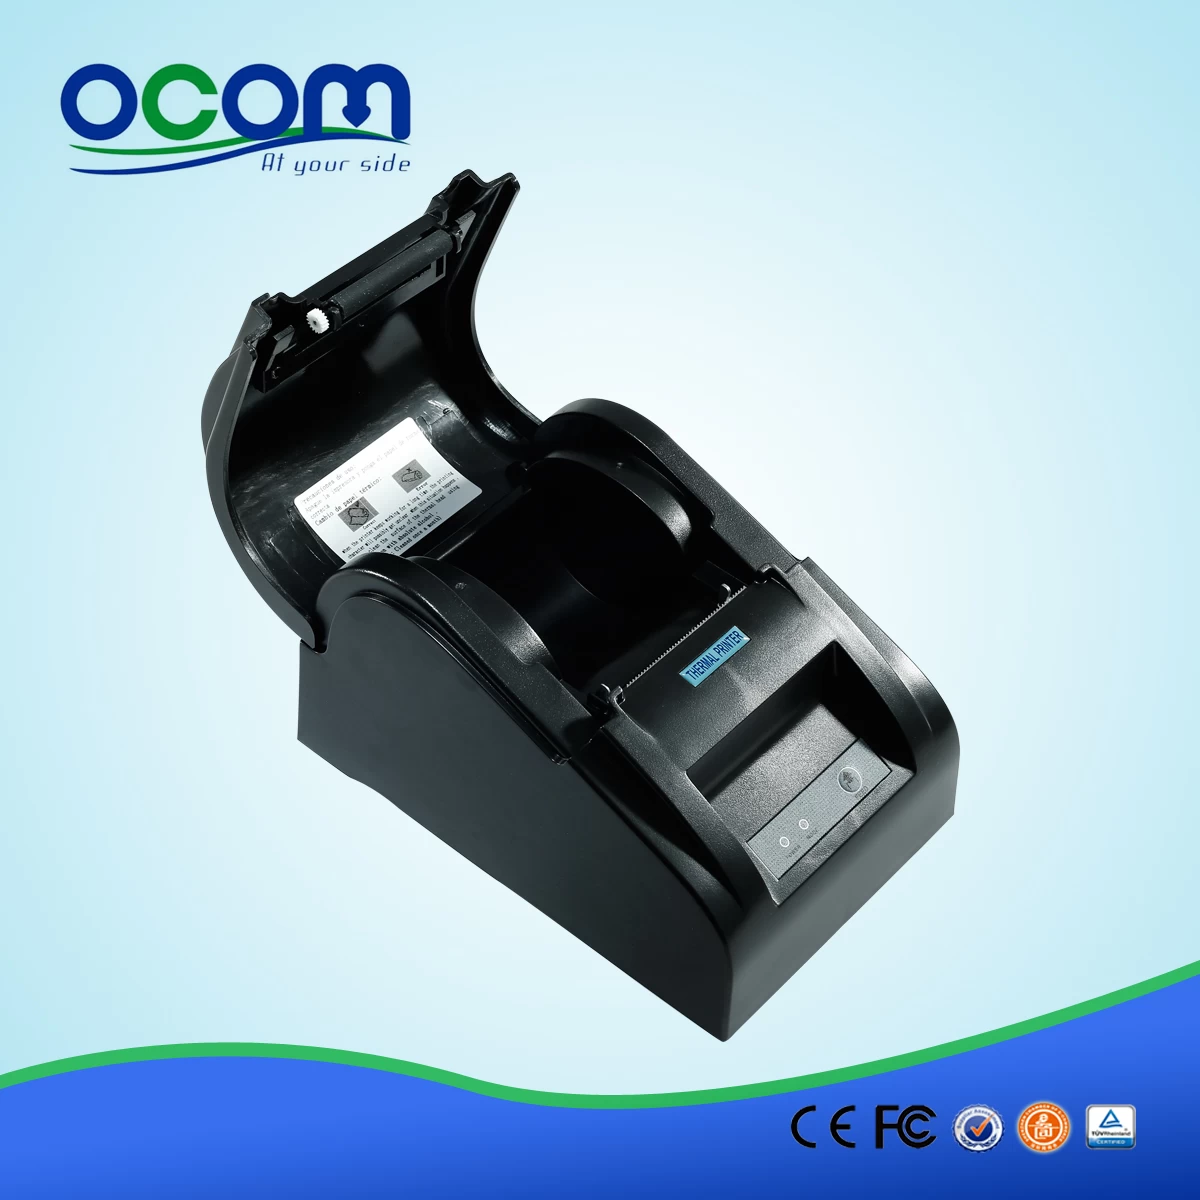 Android 58mm Thermal Bill Printer Supplier Made in China